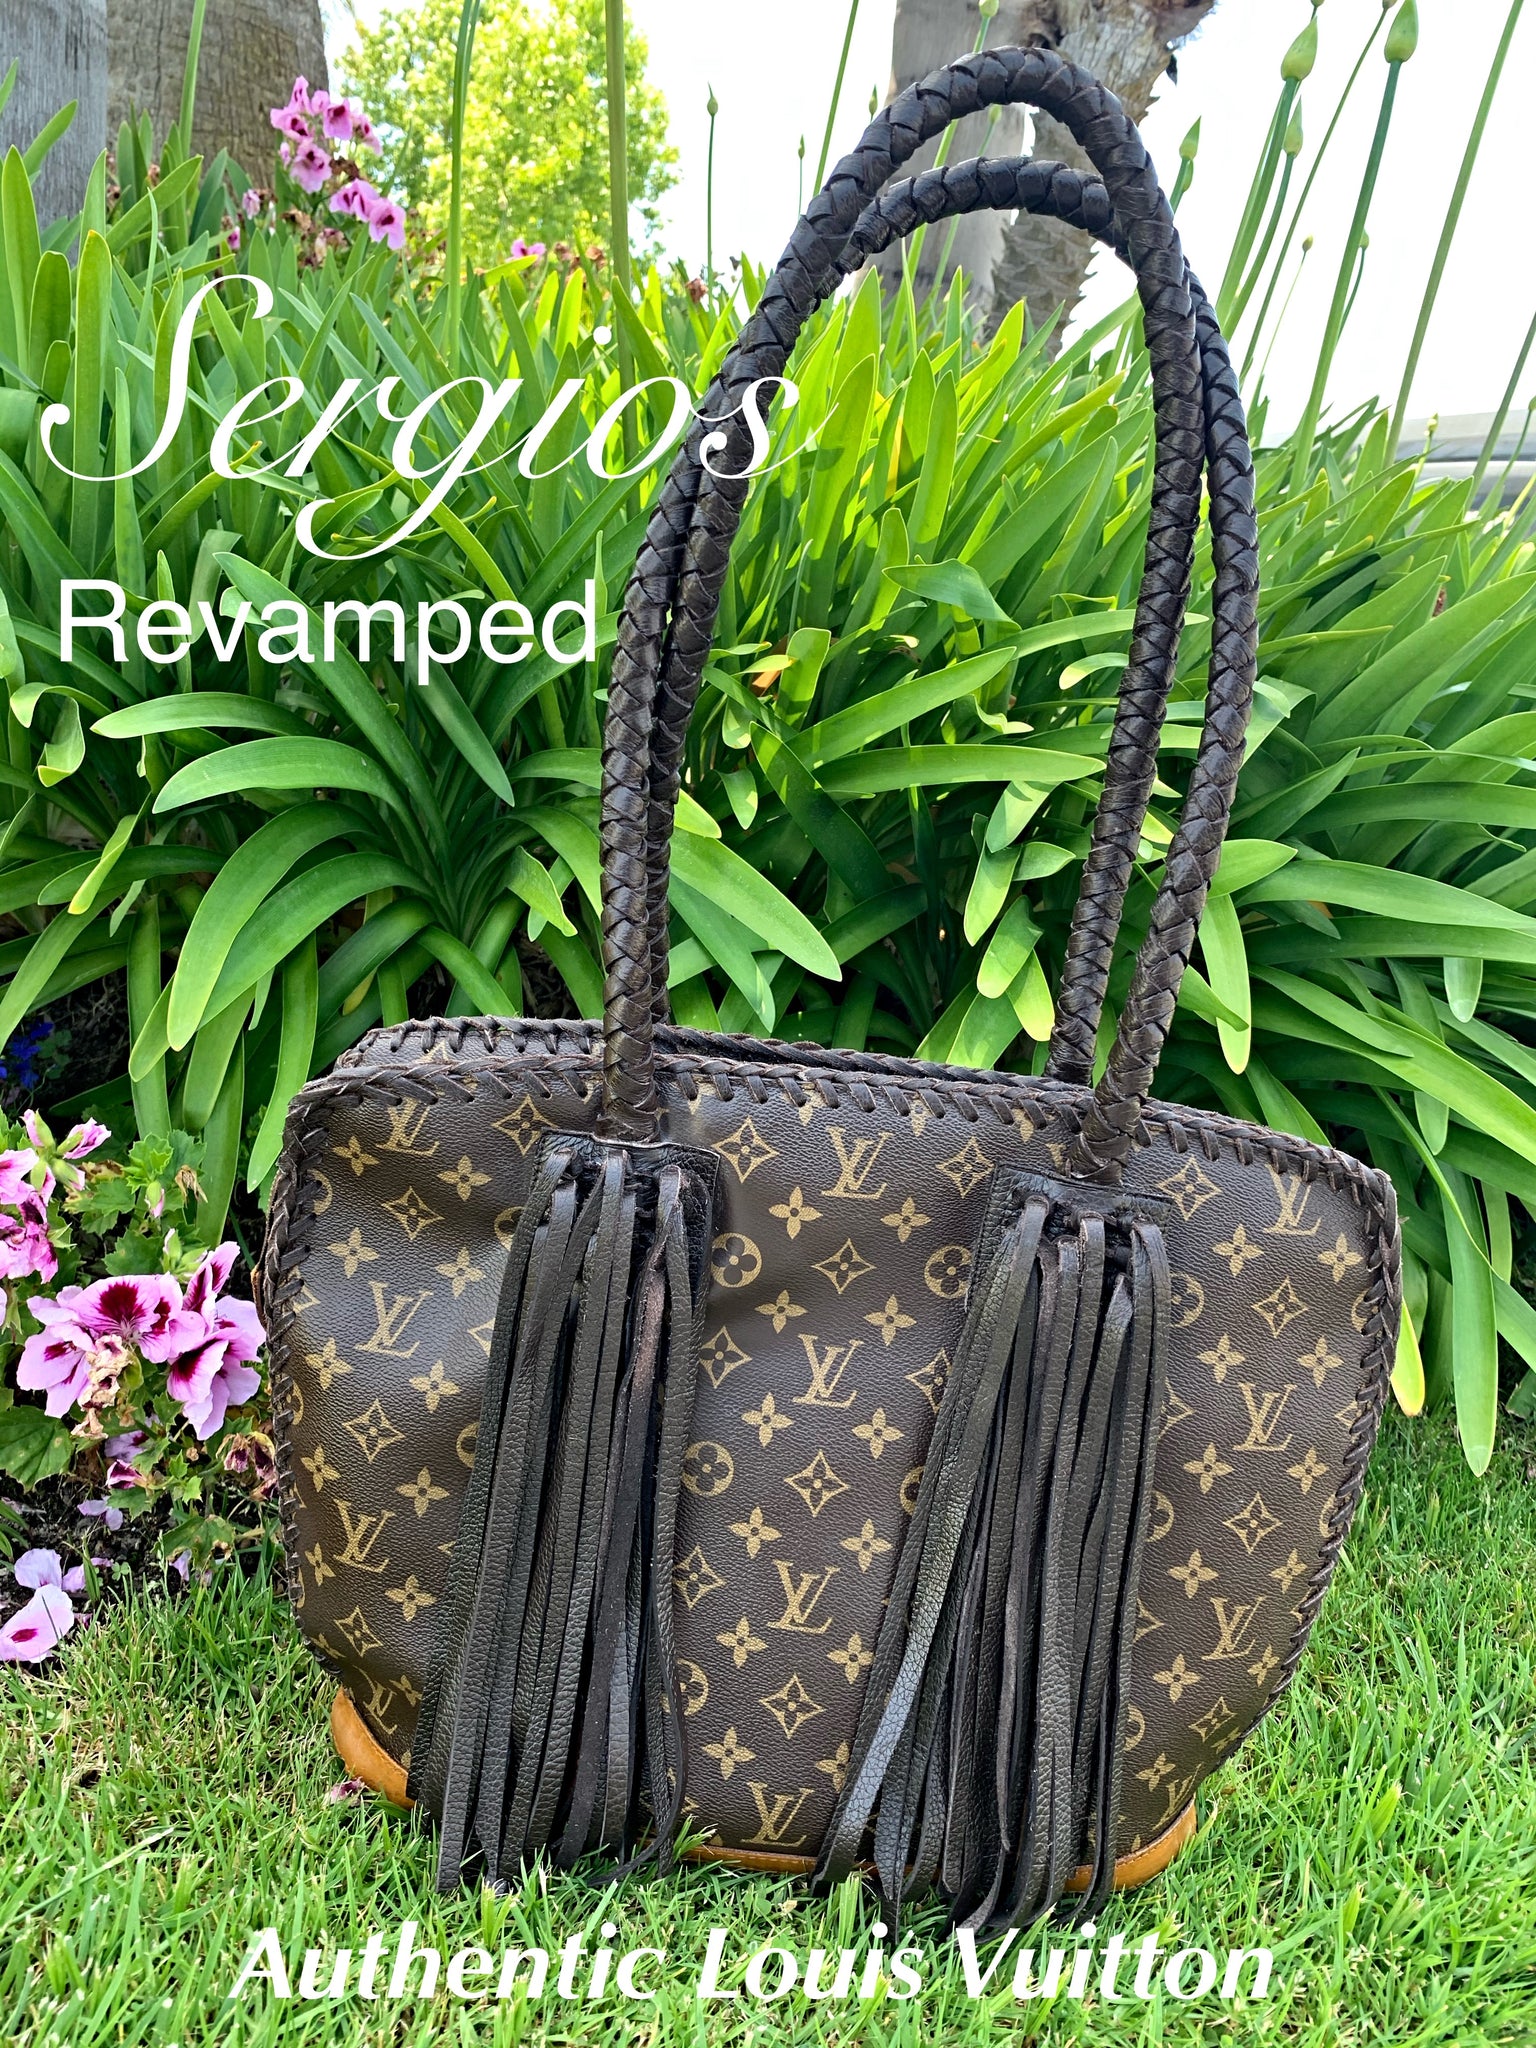 Louis Vuitton, 100 % authentic preowned and revamped by Sergios